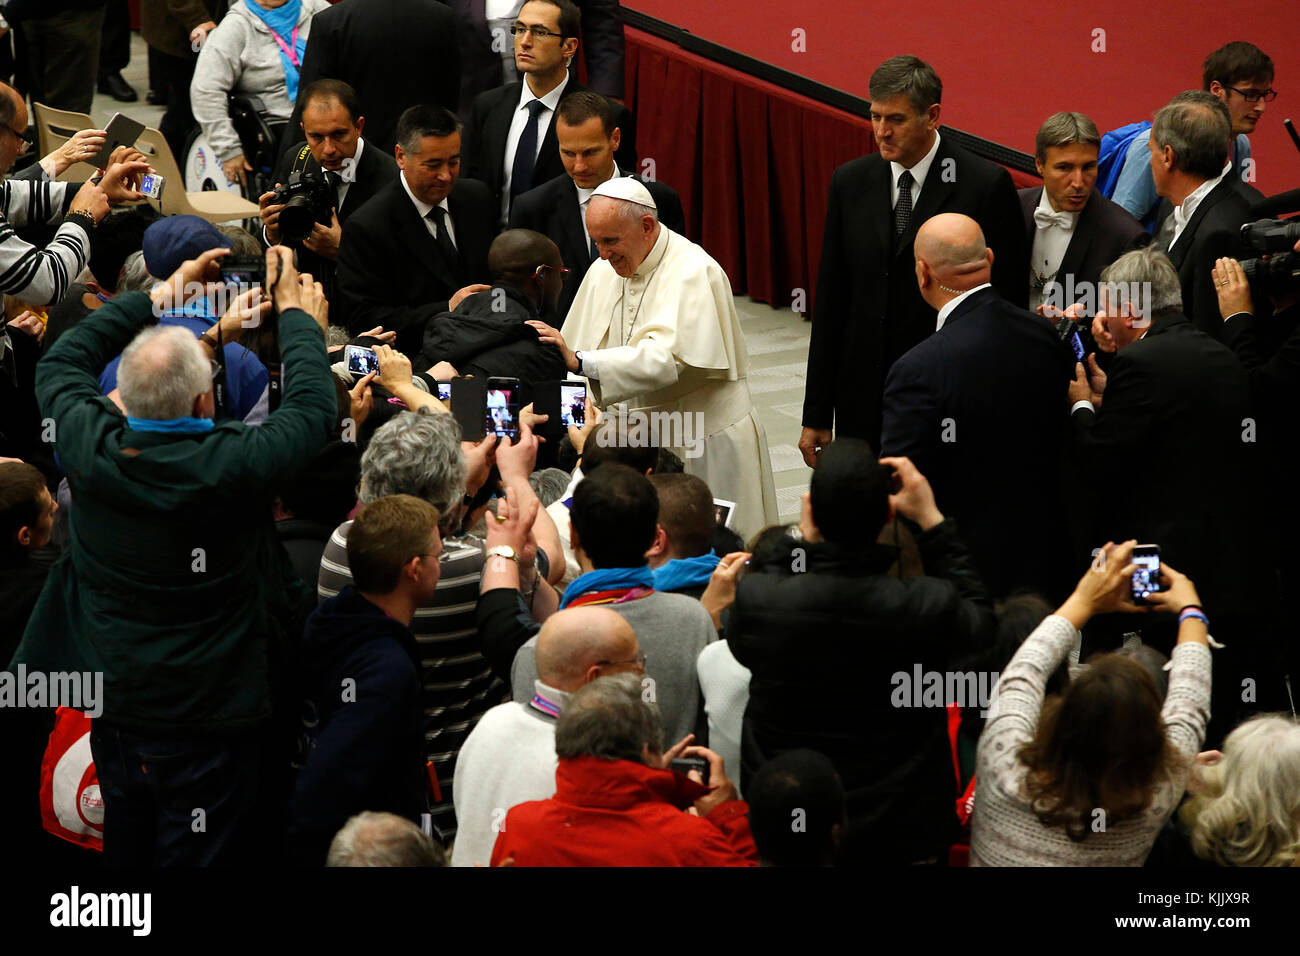 FRATELLO pilgrimage in Rome. Pope Francesco meeting homeless people. Italy. Stock Photo